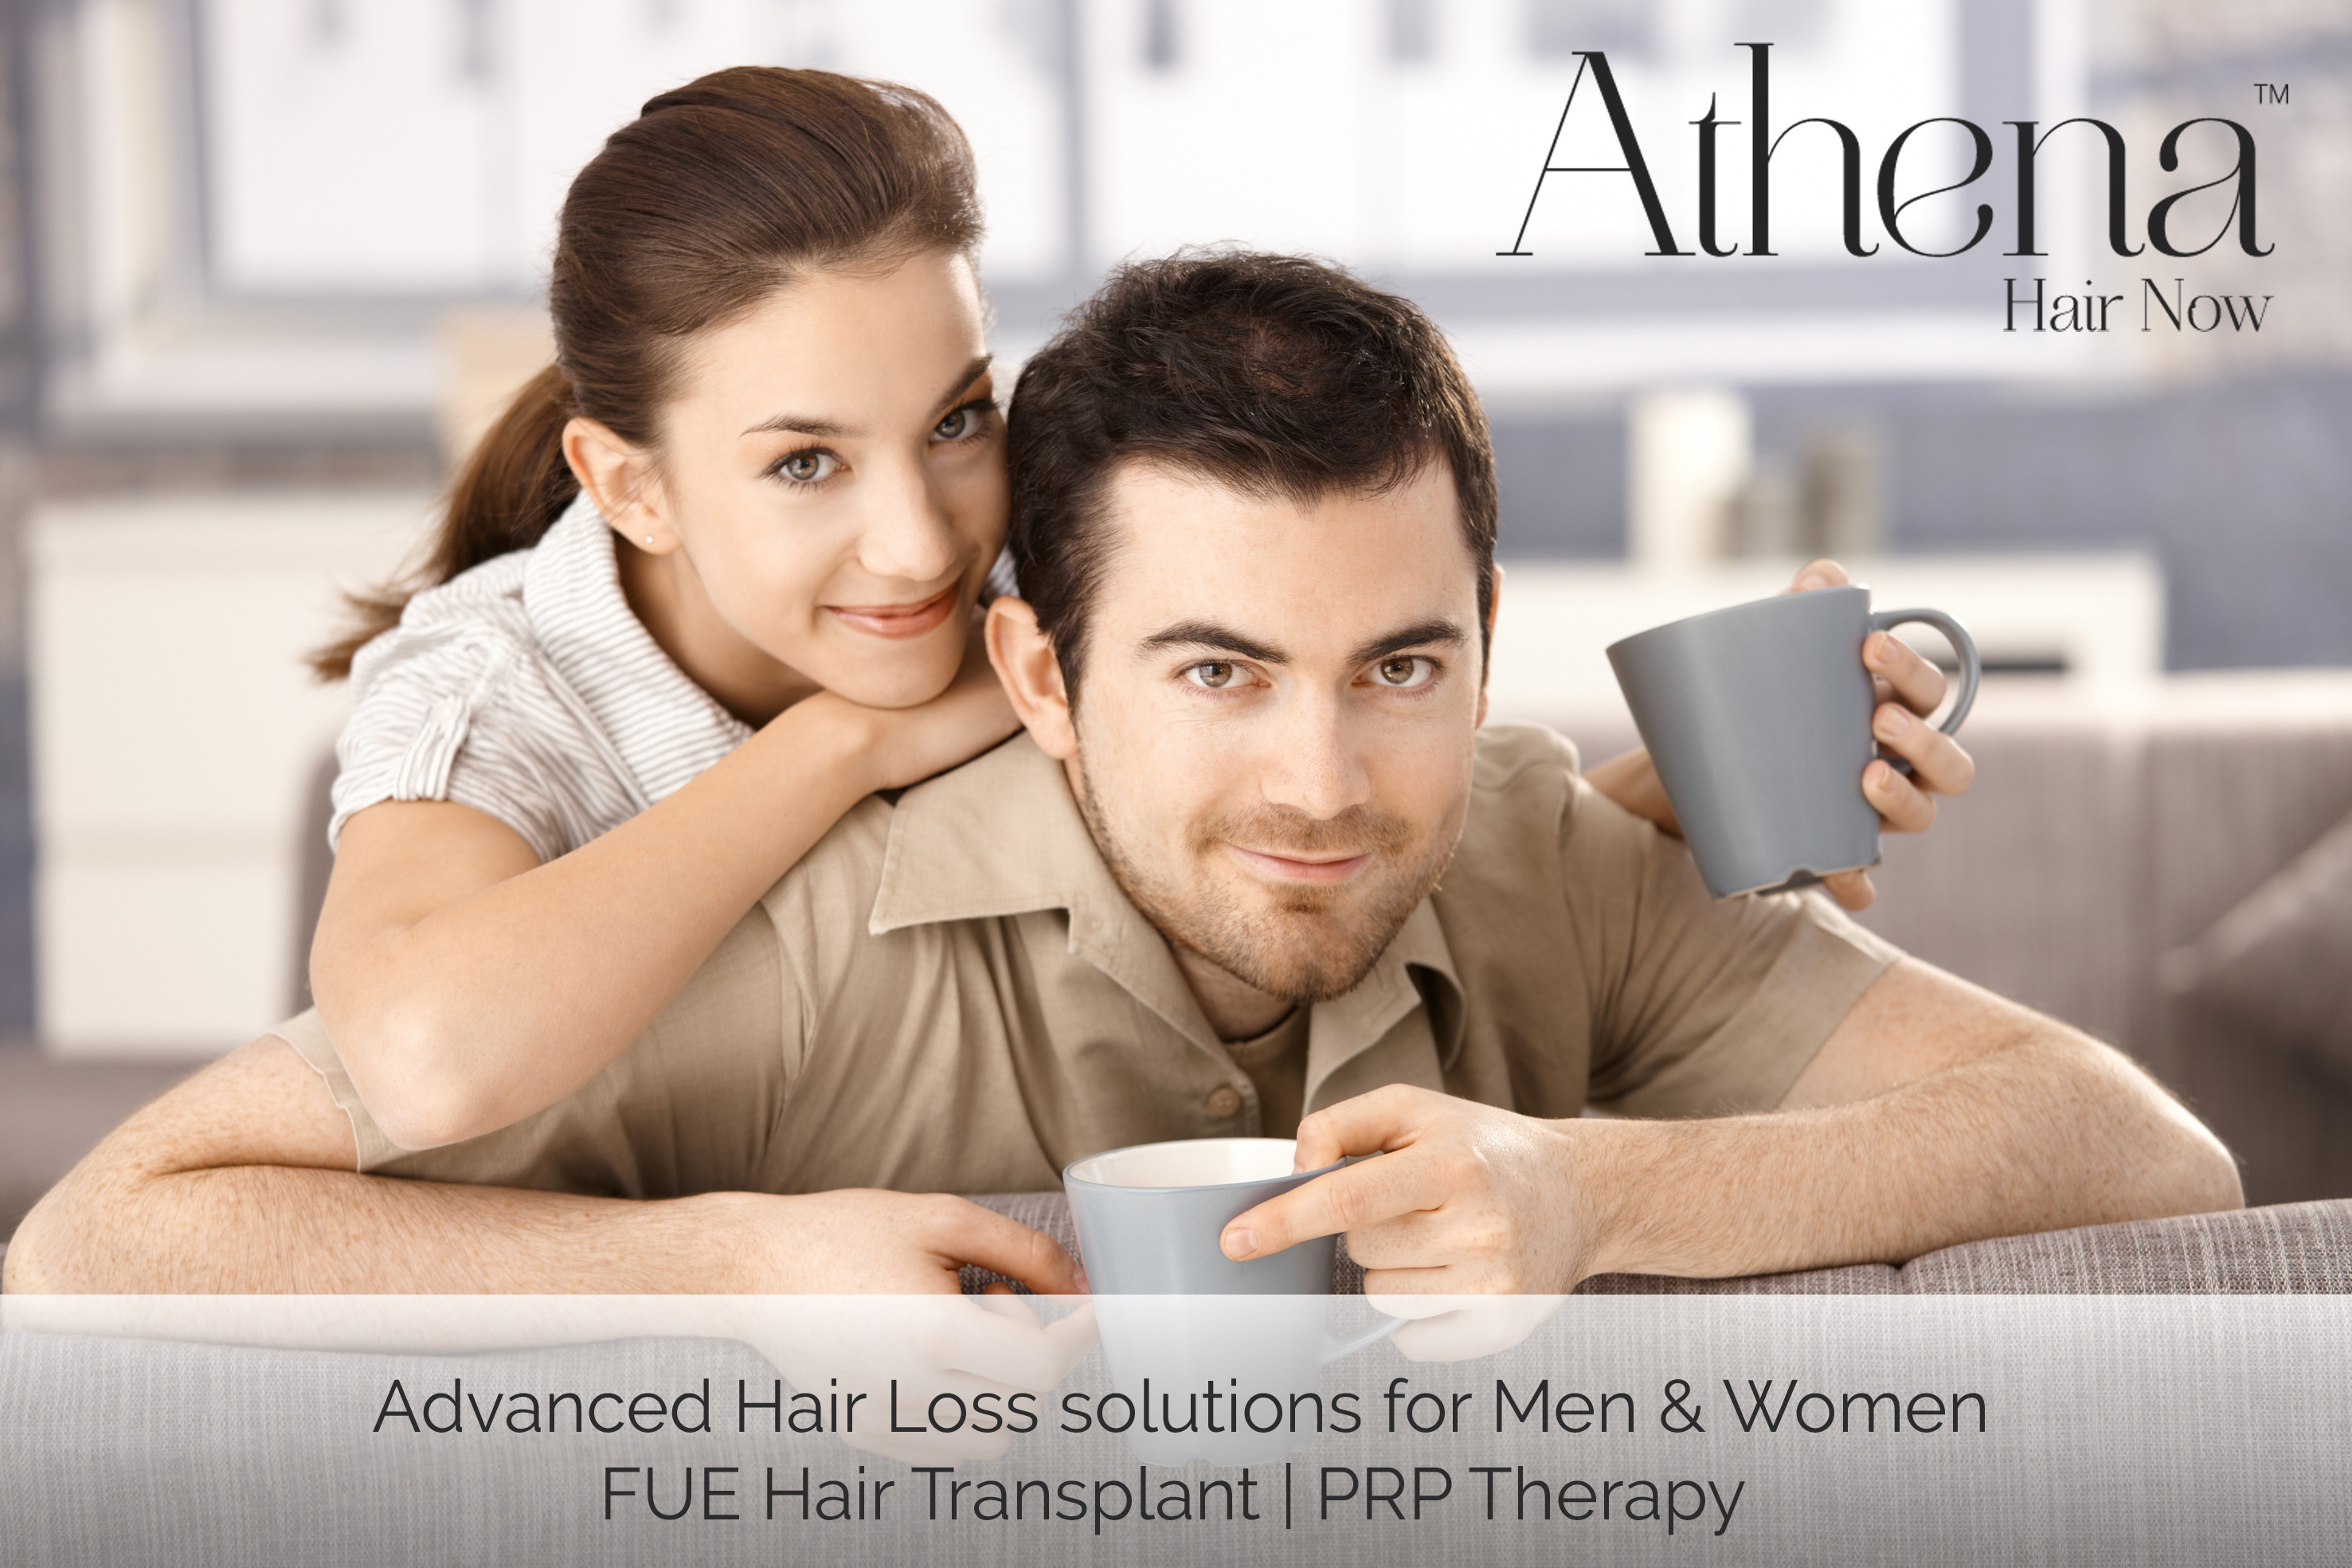 Athena Hair Now 1 - What are The Advantages Of FUE?